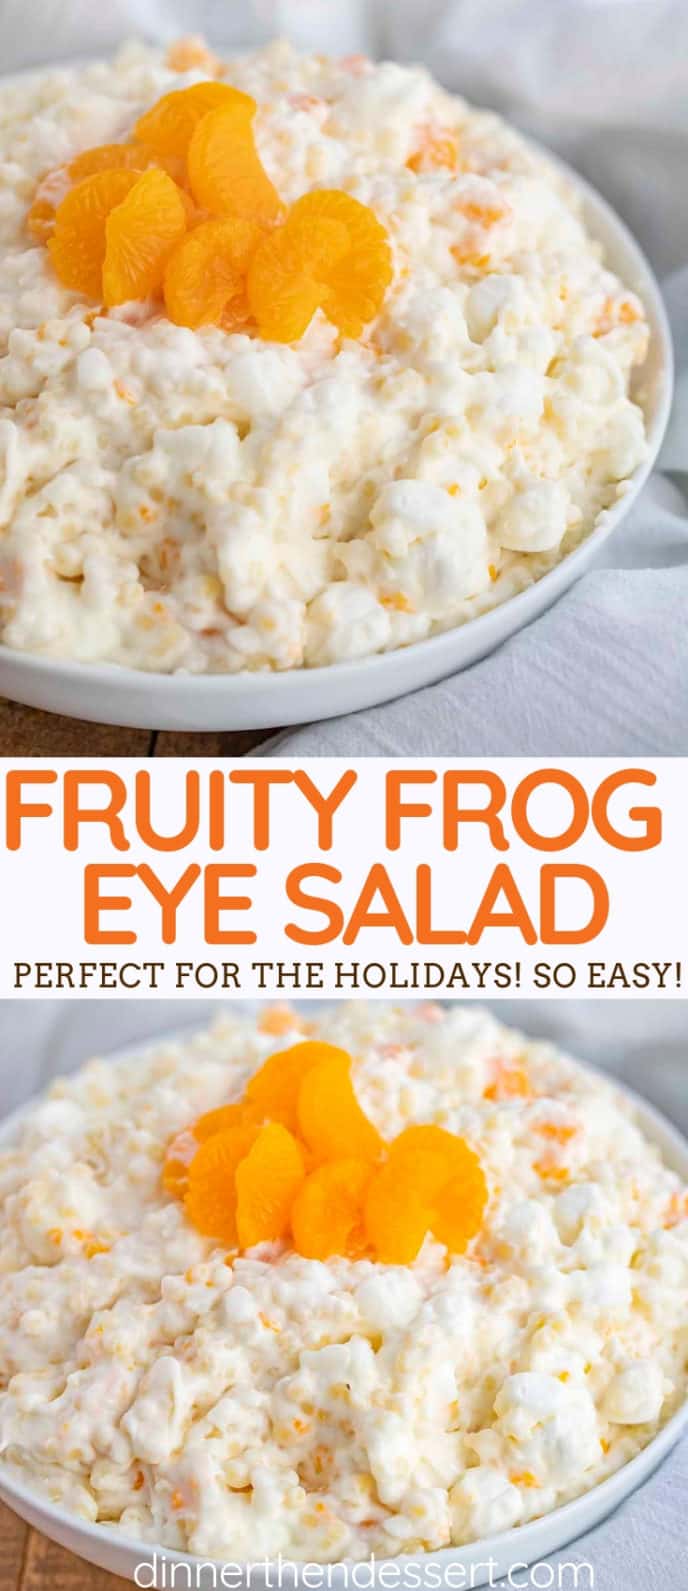 Creamy Frog Eye Salad with Mandarin Oranges and Pineapple and Marshmallows